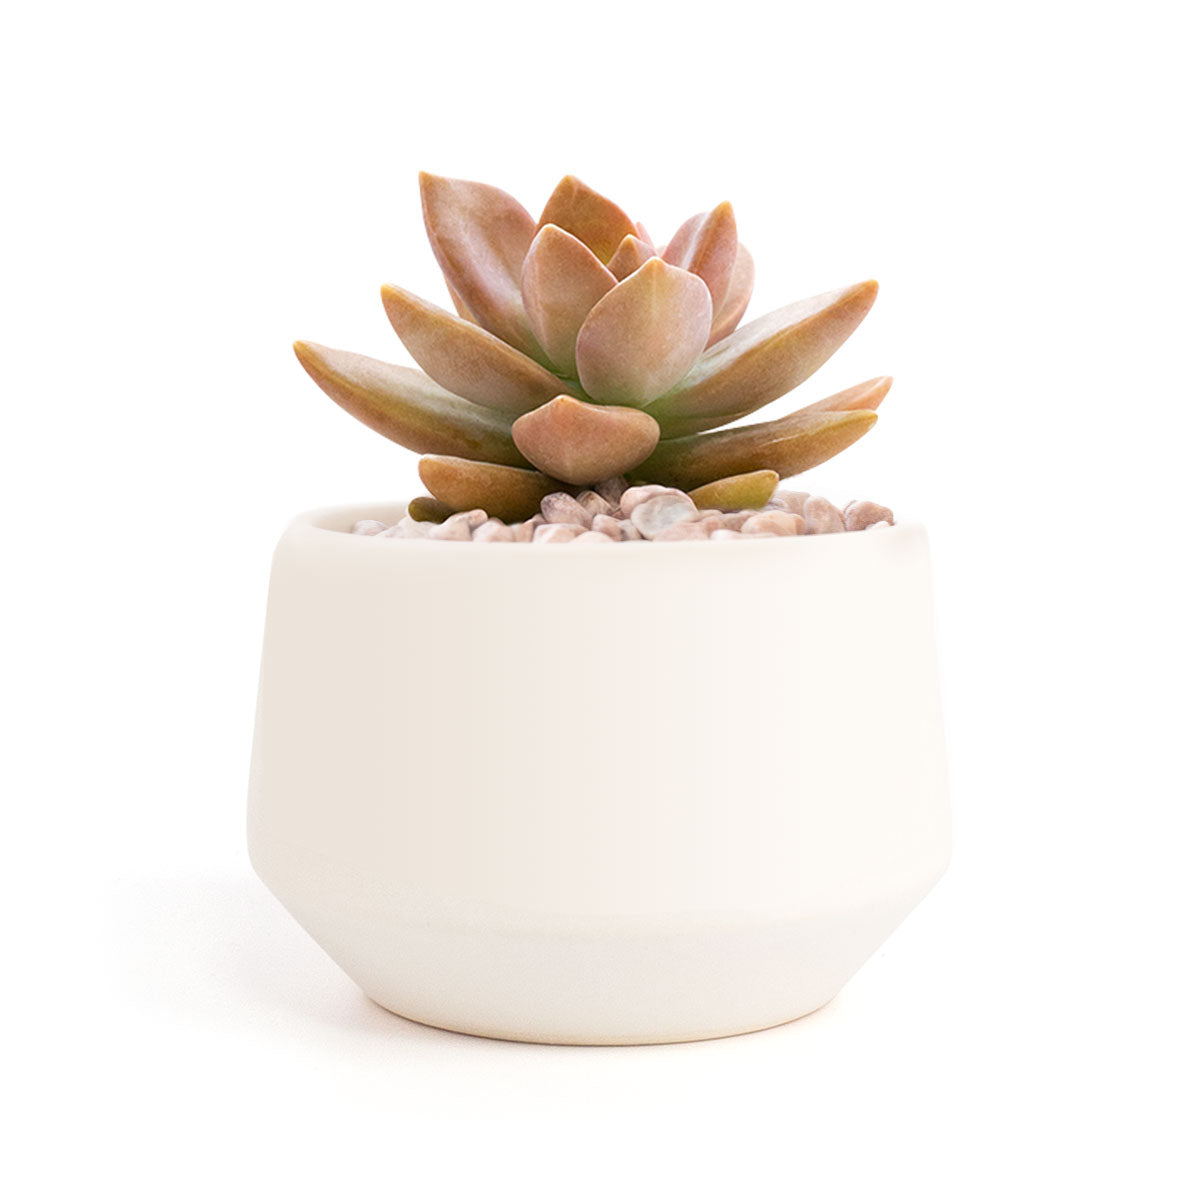 Modern Pot Decor for Home or Office, High Quality Ceramic Pot for Plants and Flowers, Modern Style Indoor Ceramic Planter, Small Minimalist Pot